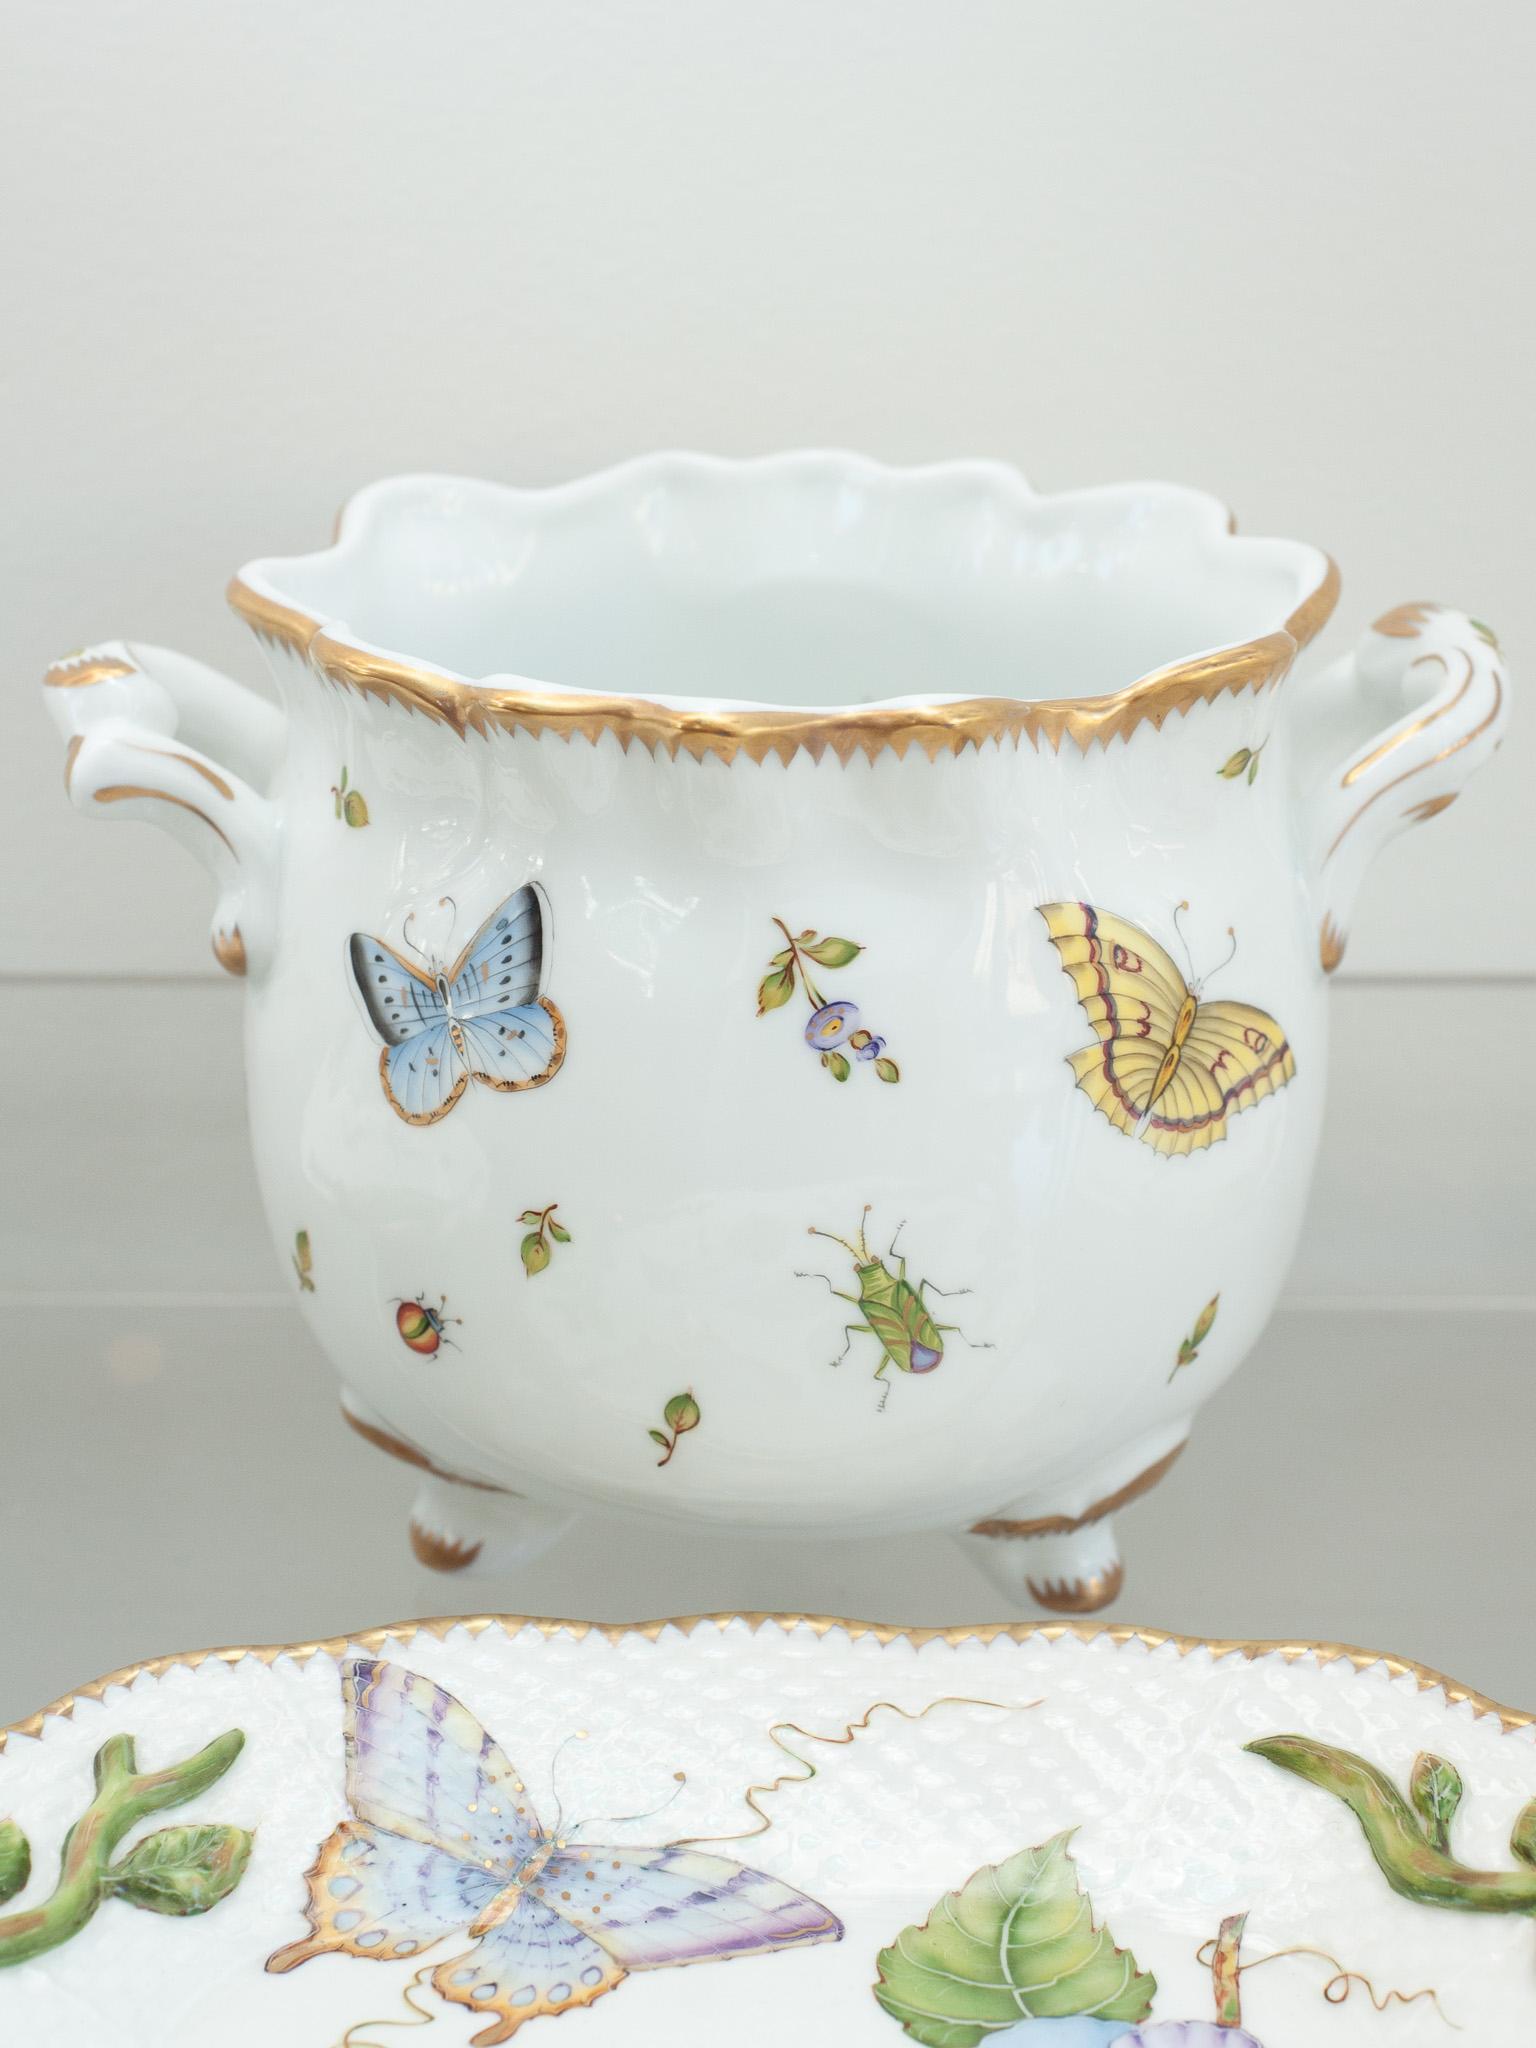 American Anna Weatherley Designs Hand-Painted Footed Porcelain Cachepot Handles For Sale